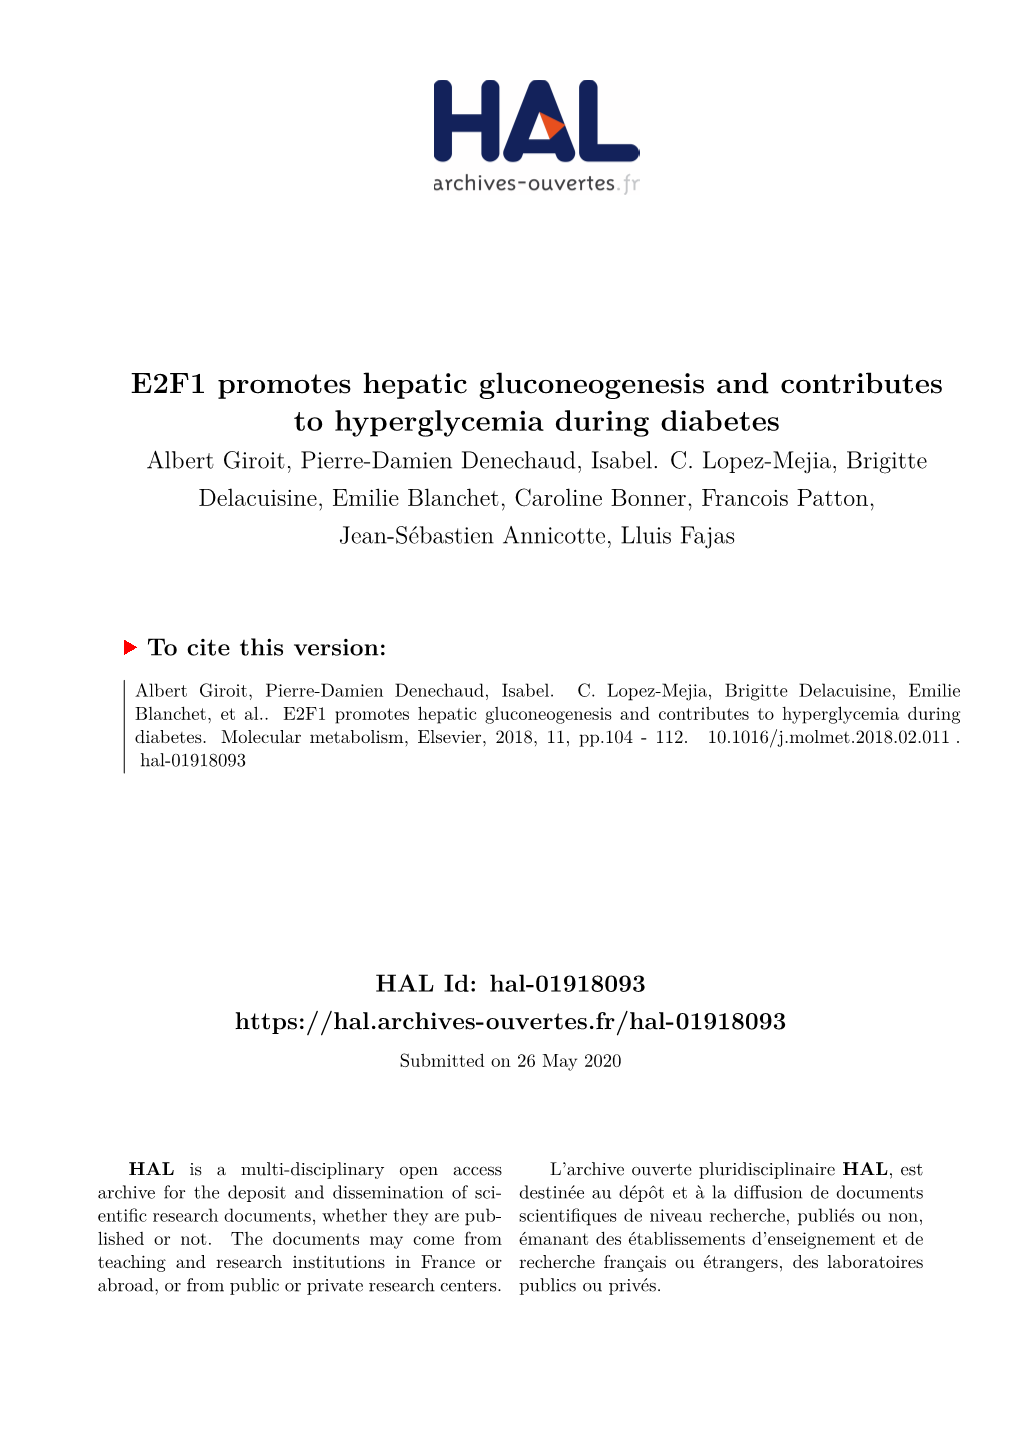 E2F1 Promotes Hepatic Gluconeogenesis and Contributes to Hyperglycemia During Diabetes Albert Giroit, Pierre-Damien Denechaud, Isabel